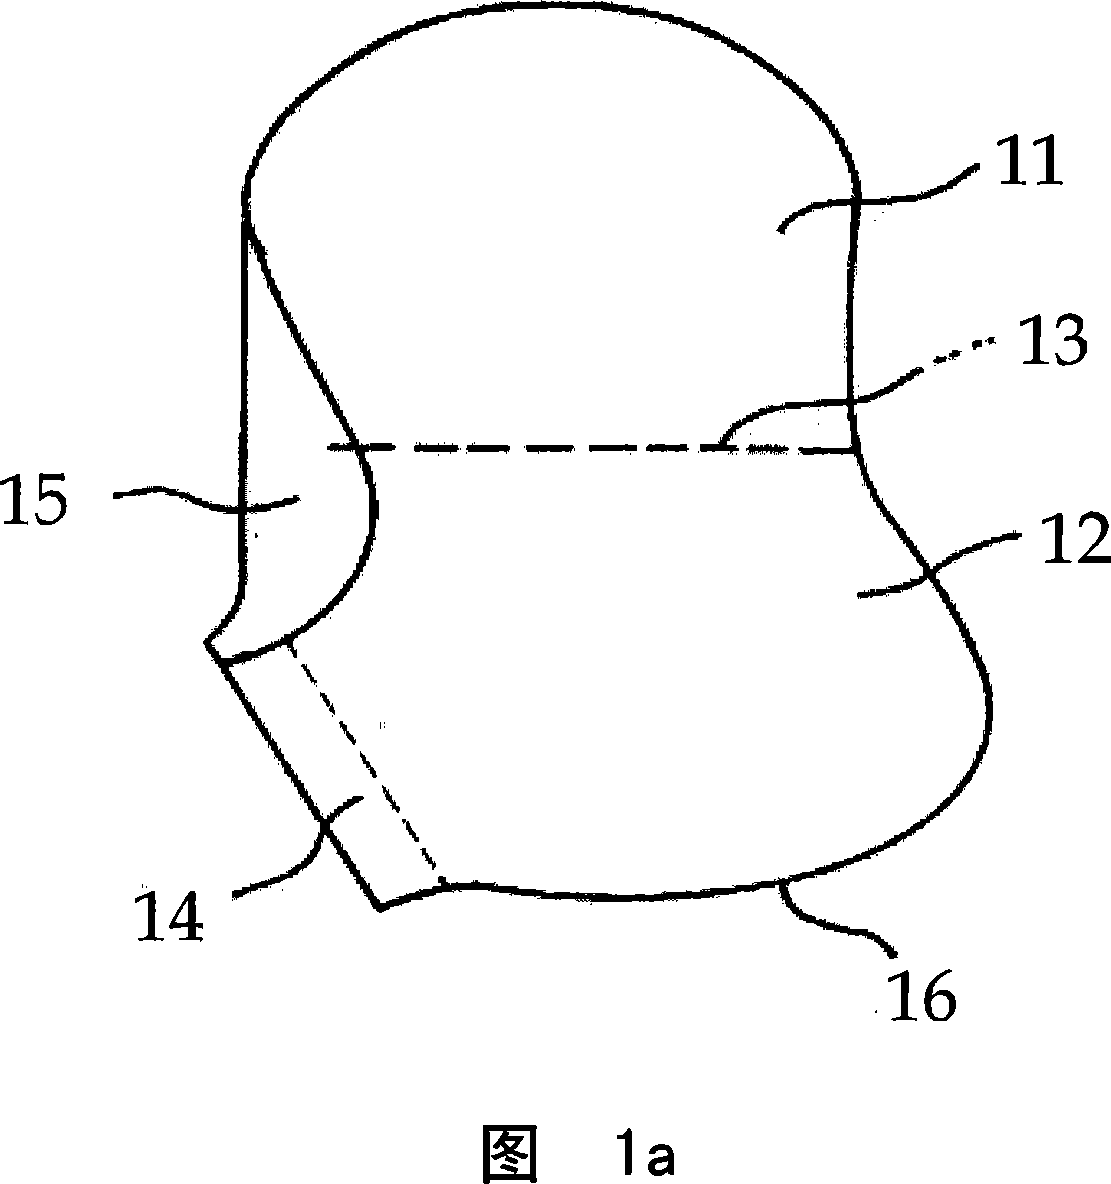 Bracket for securing side airbag for automotive vehicle